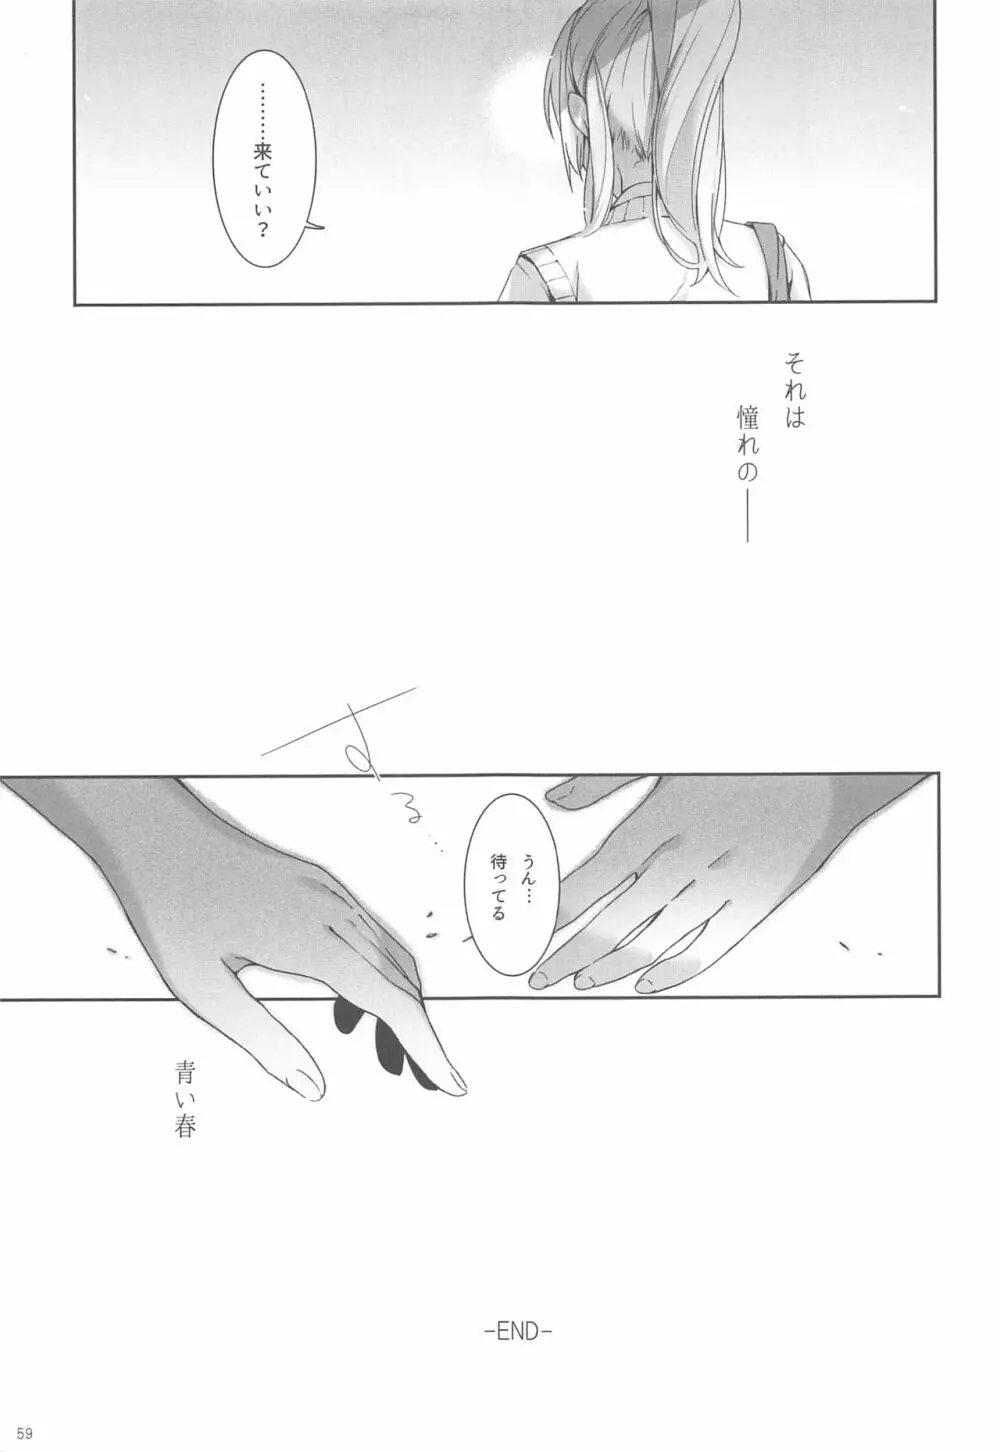 Re:デーデッデー!!!!!!!! - page60